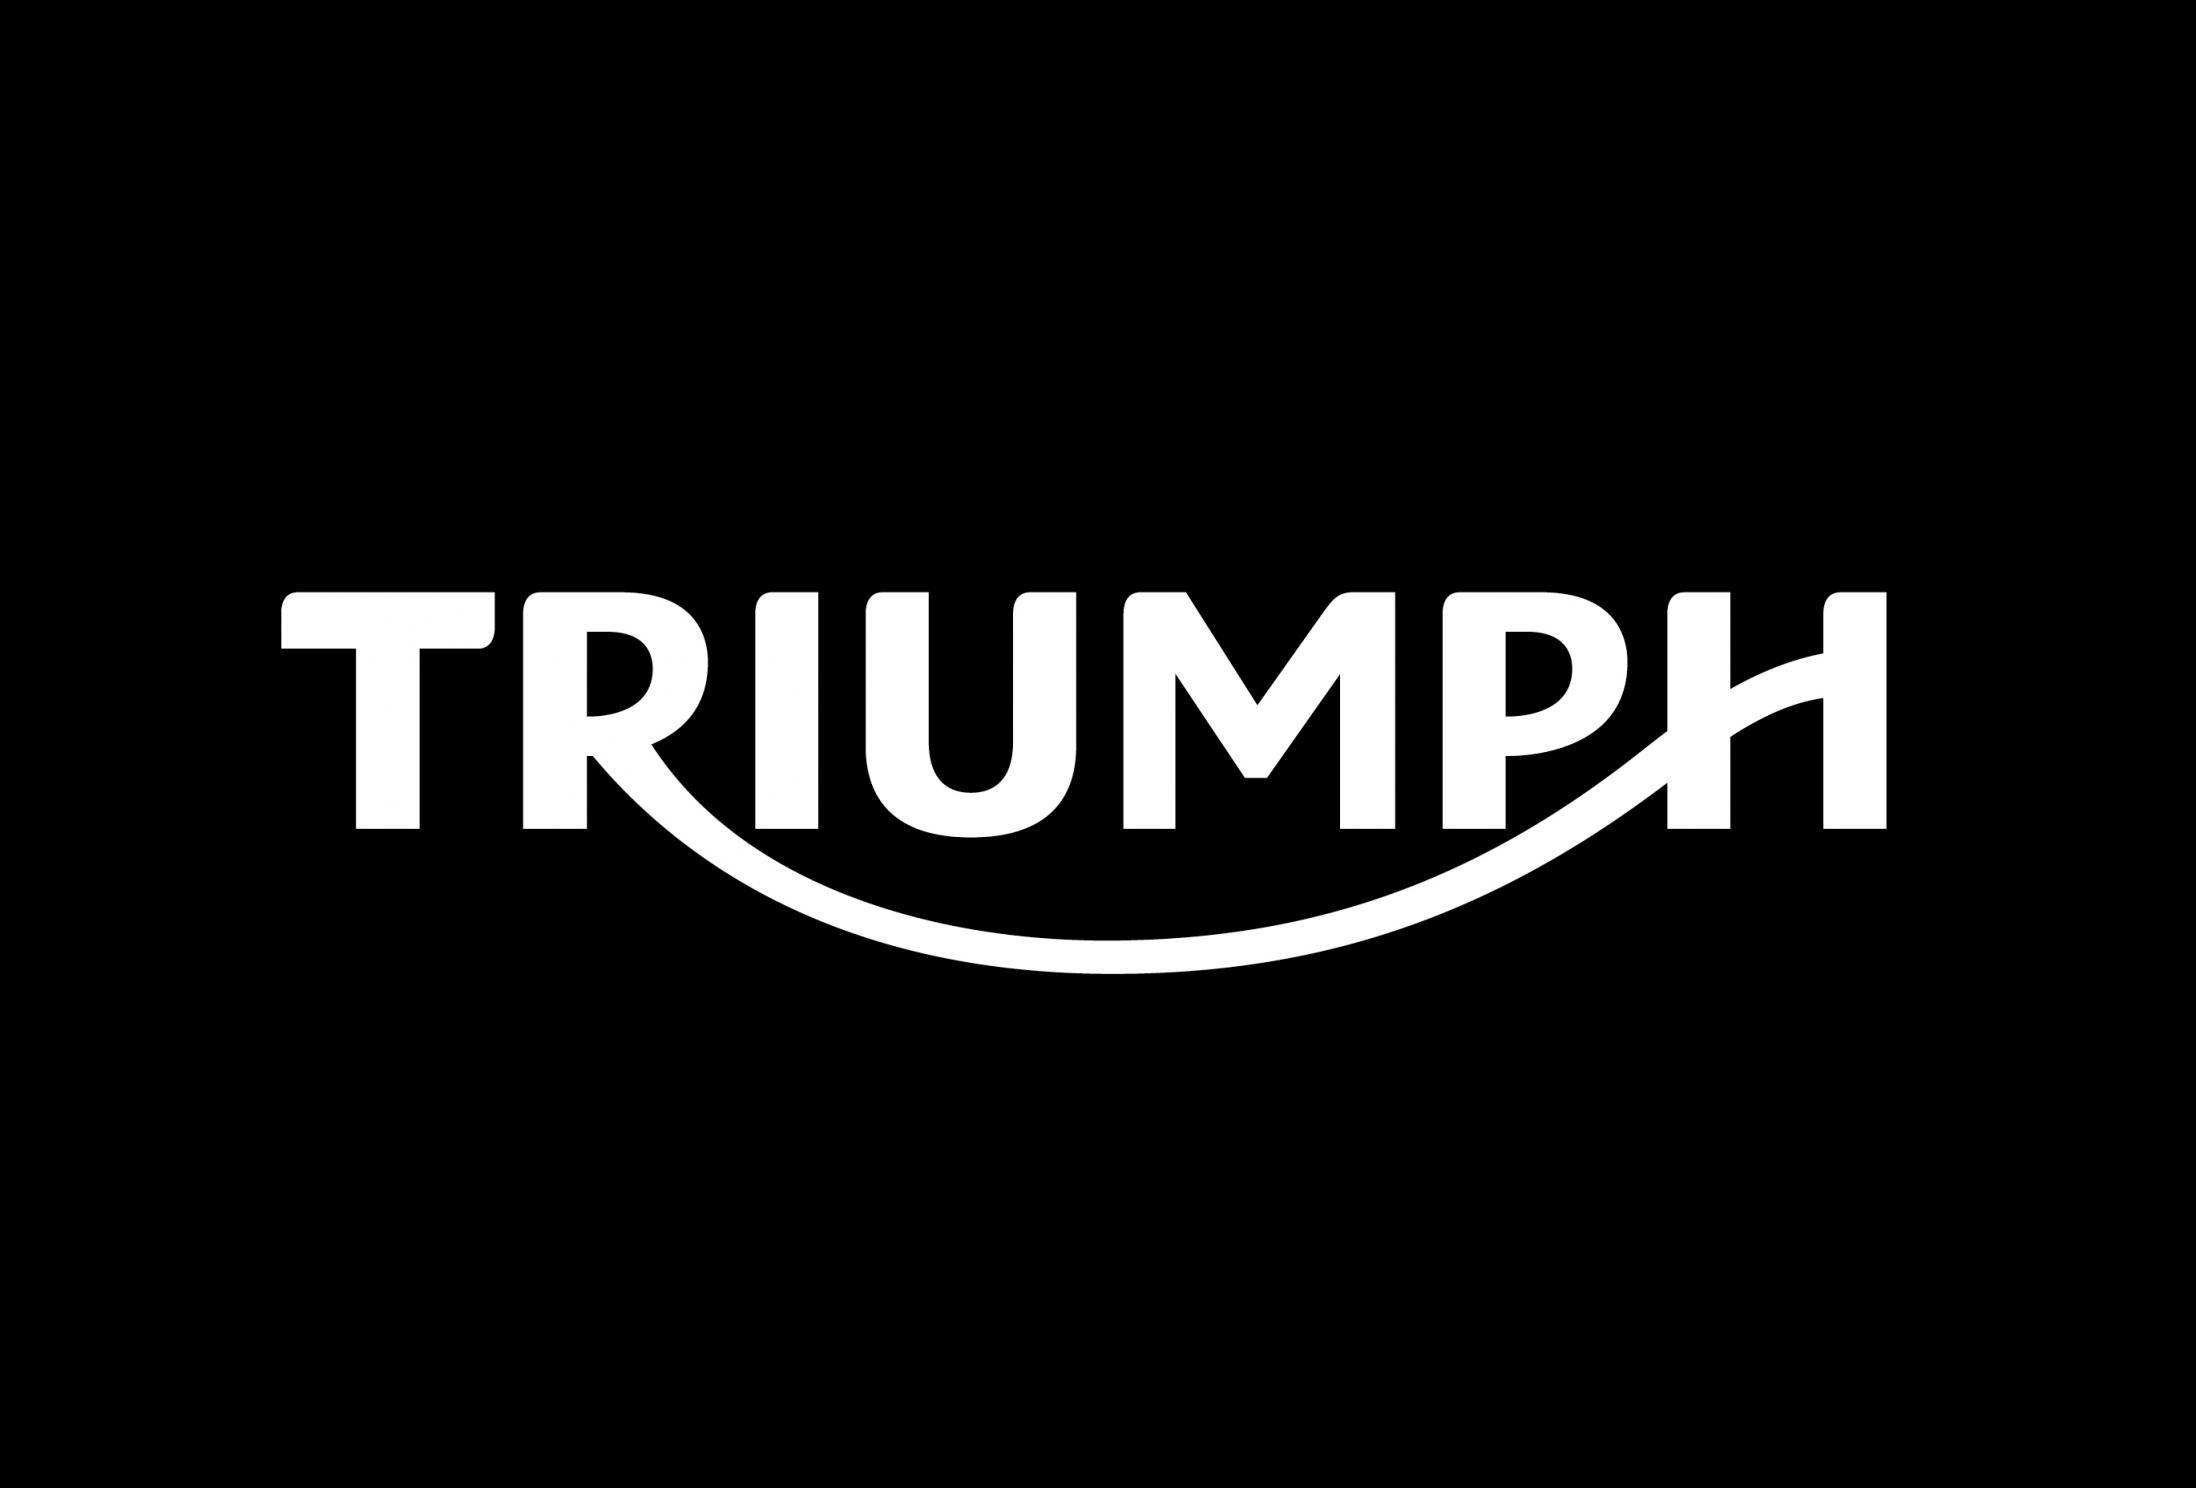 Motorcycle Black and White Brand Logo - Triumph Motorcycles. Face37 Ltd. Type. Triumph motorcycles